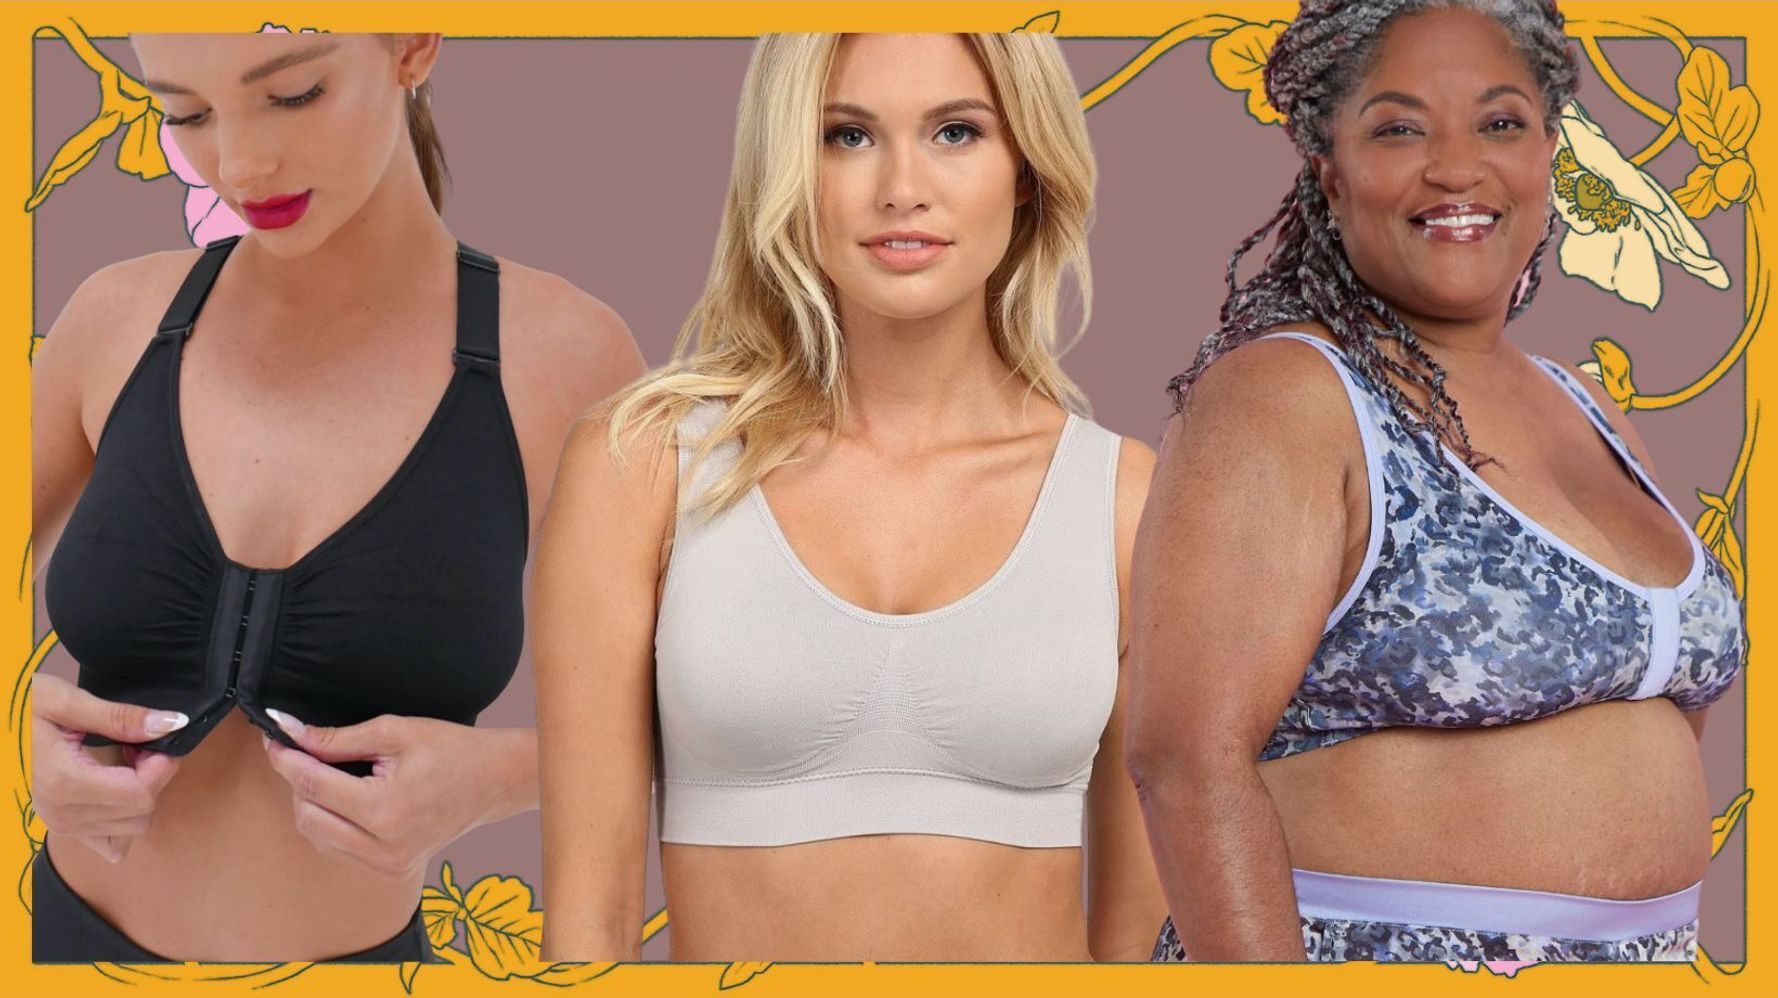 The Best Bras to Buy After a Breast Reconstruction - Mastectomy Shop